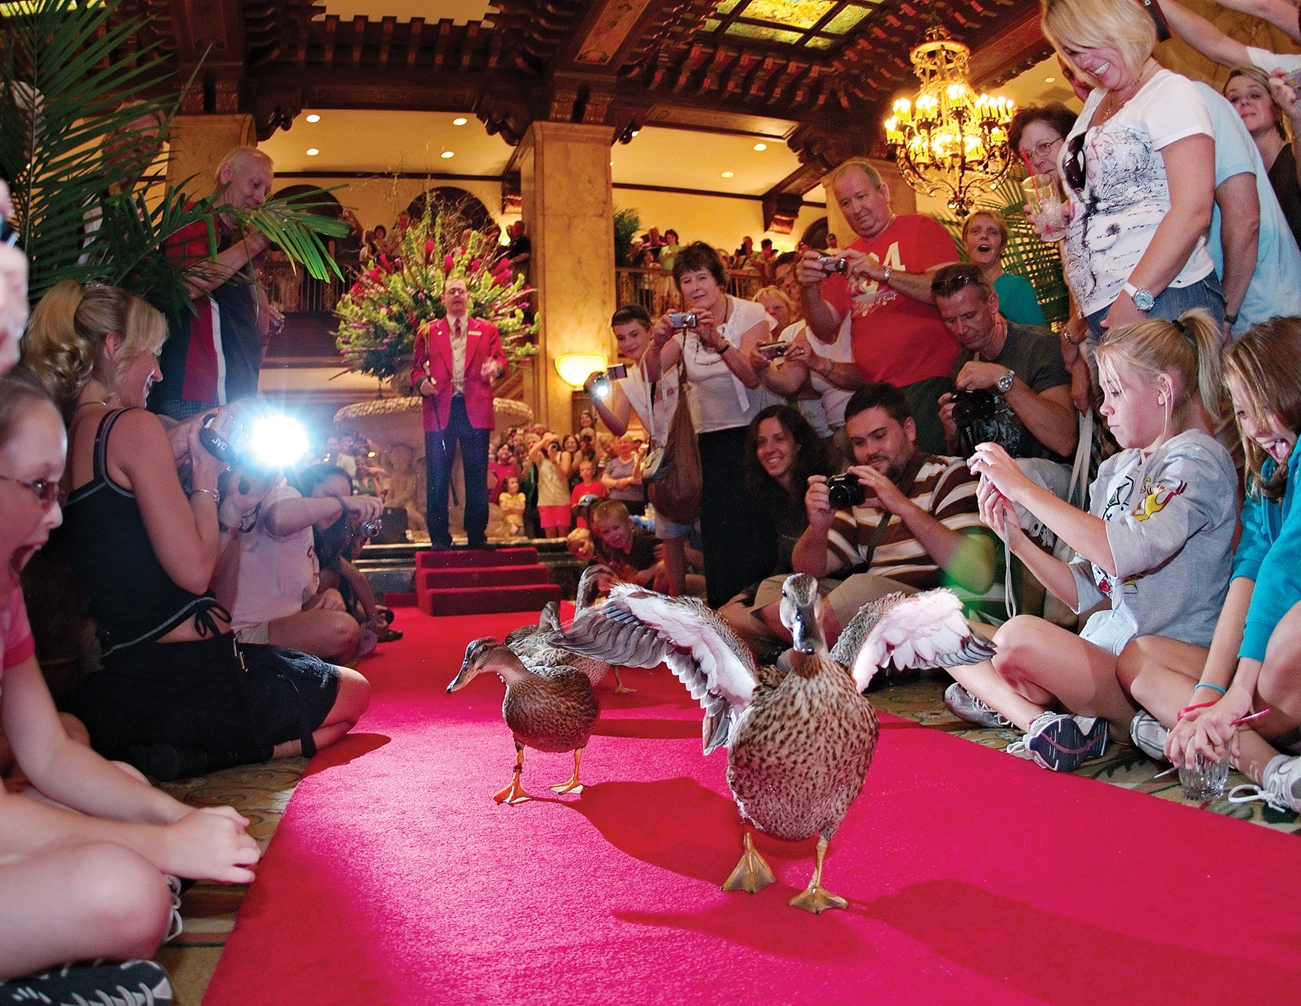 The famous duck walk at The Peabody Memphis. Doug Browne of The Peabody Memphis (1869) Memphis, Tennessee was honored as the 2016 Historic Hotelier of the Year.